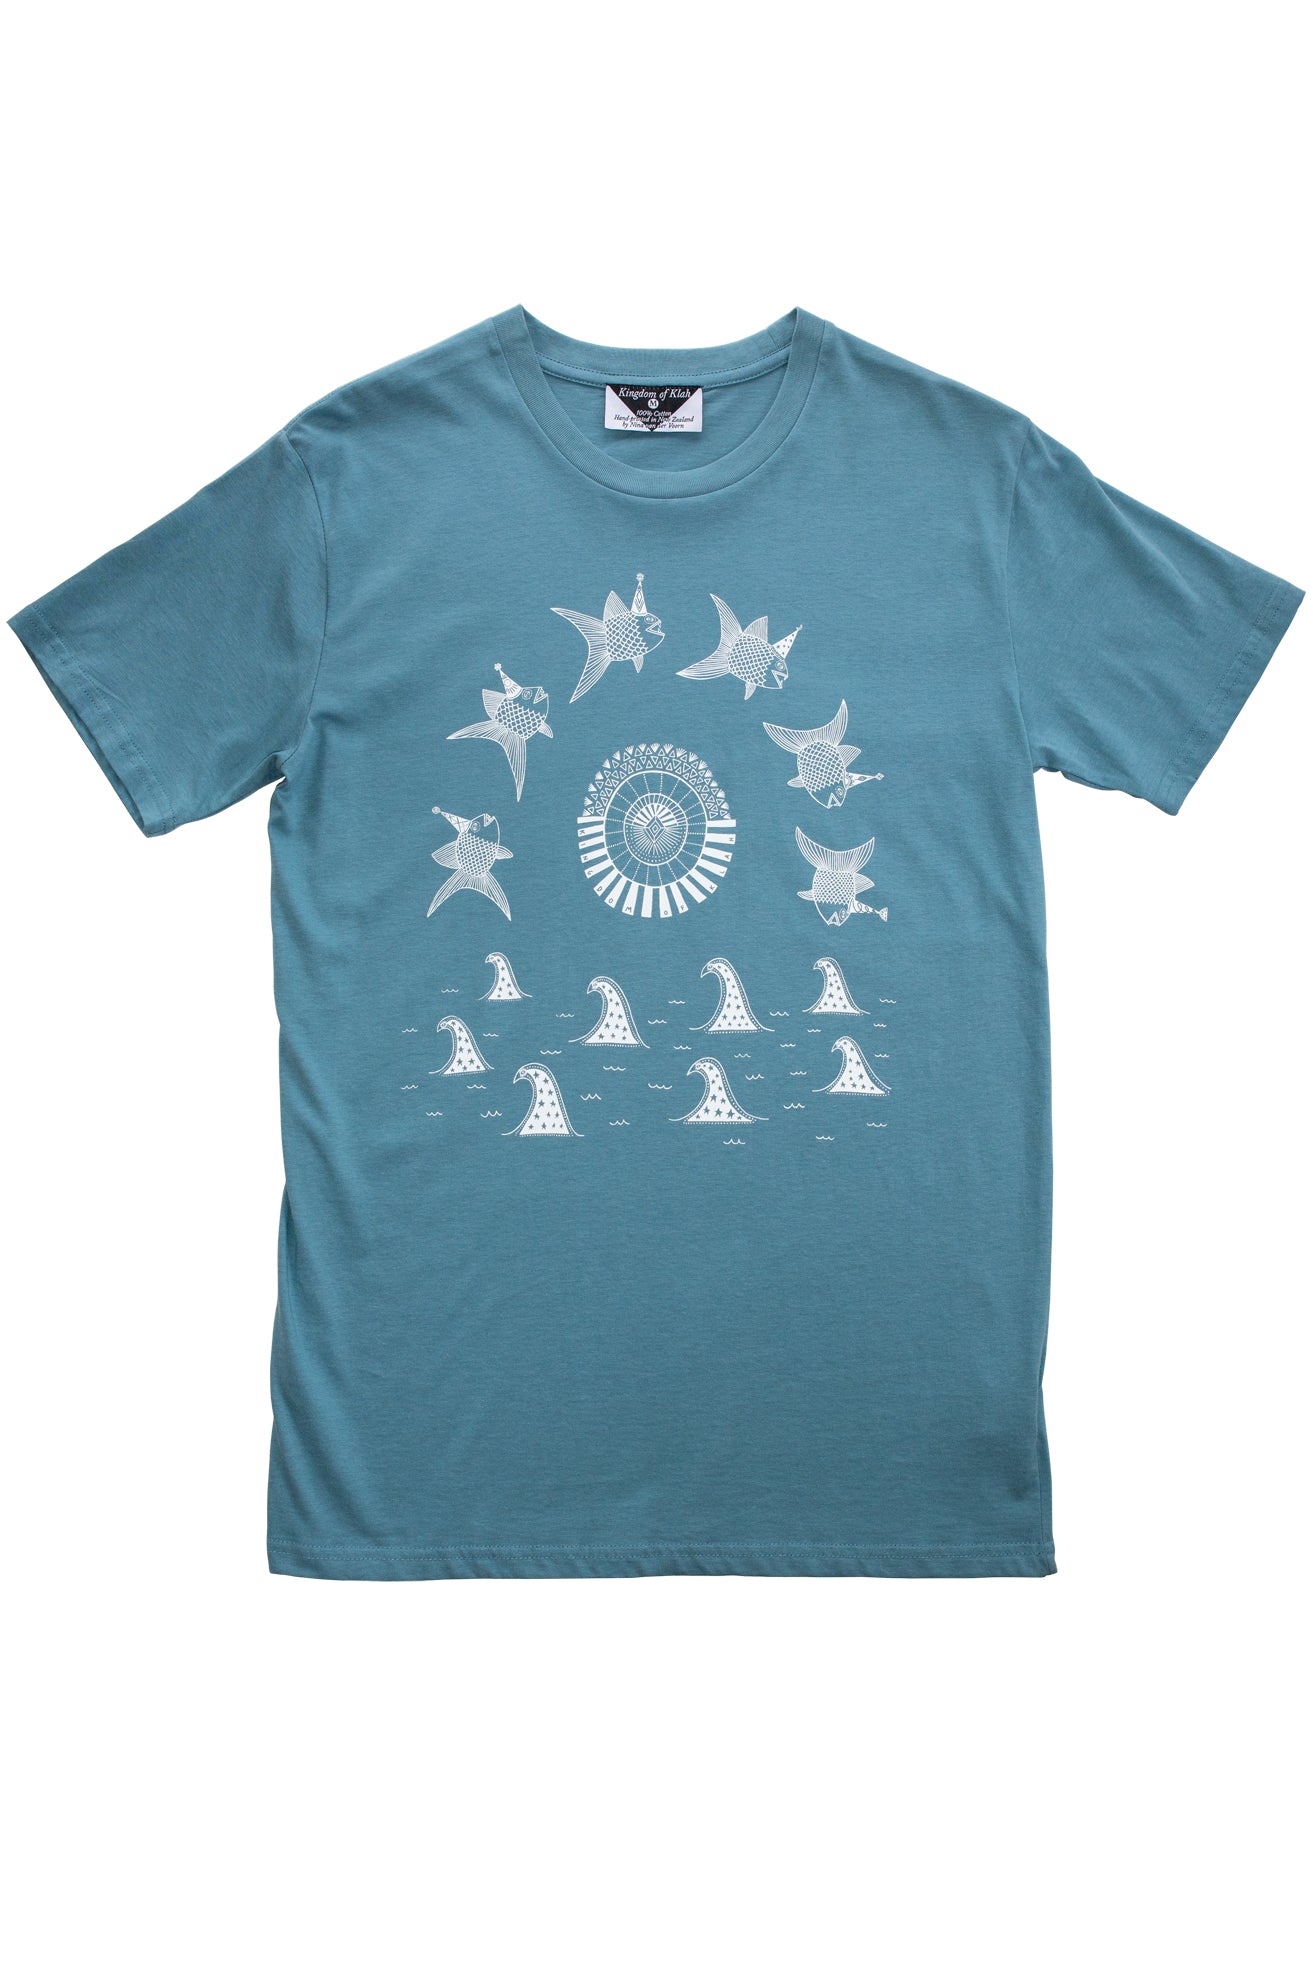 The Pancake Seas & The Wizard Hatted Fish Men's Sovereign Tee